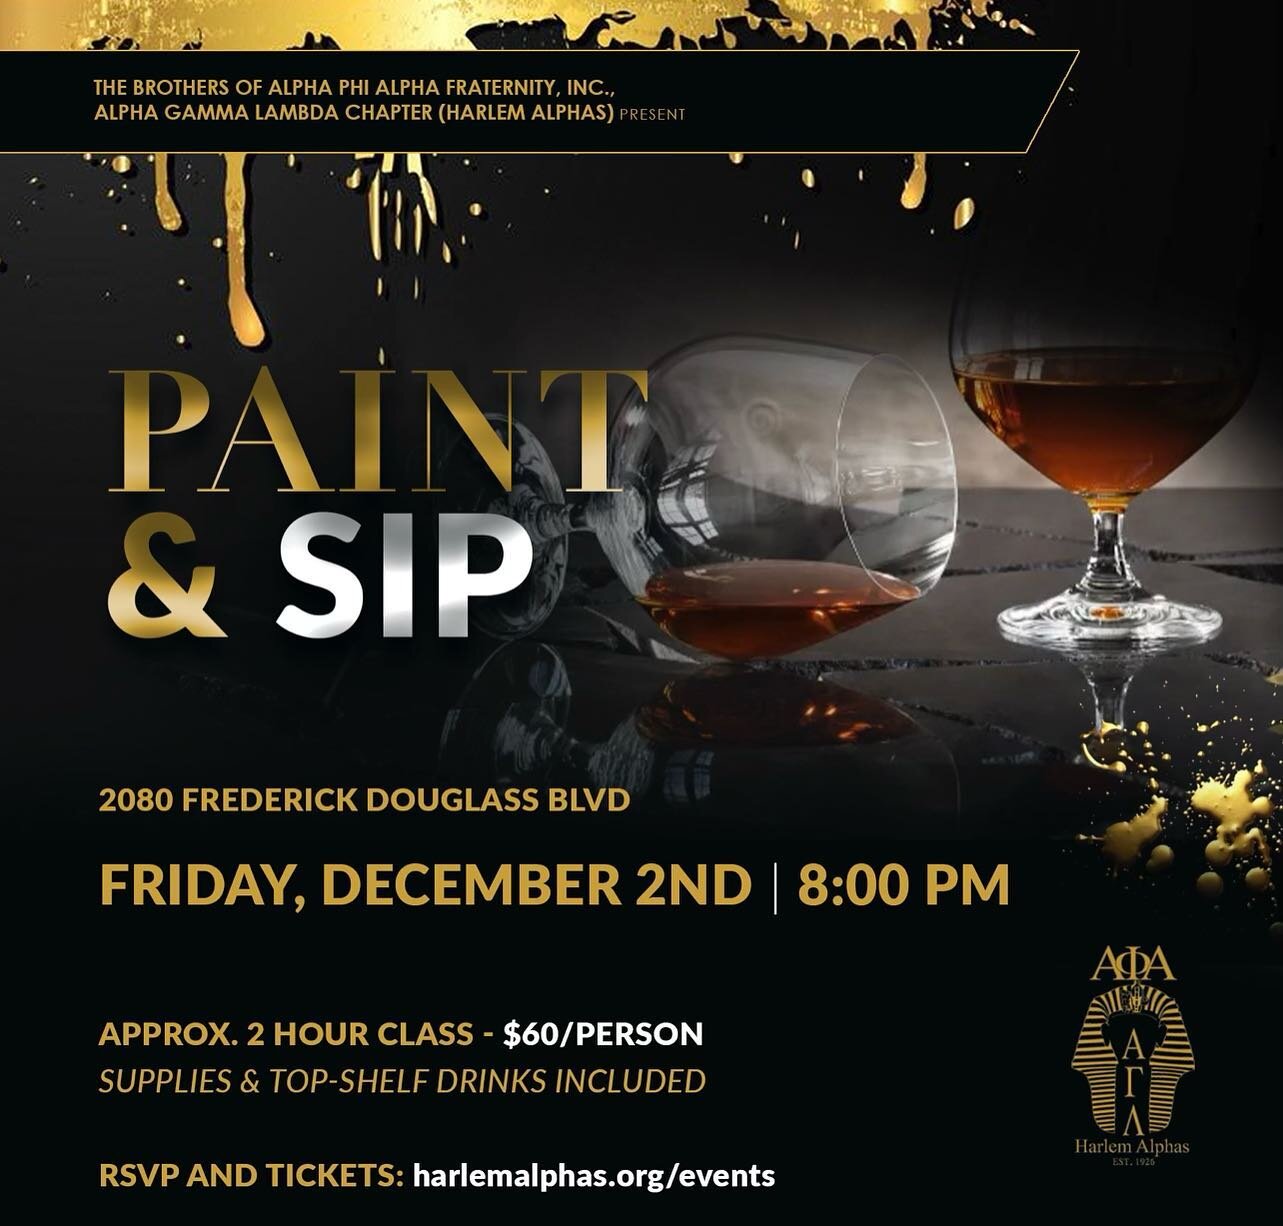 Join The Harlem Alphas for a night of fun, art, and community as we kick-off Founder's Day weekend! This will be a Paint &amp; Sip you DO NOT want to miss!

Tickets are available via the link in our bio. 

See you on Friday December 2nd!